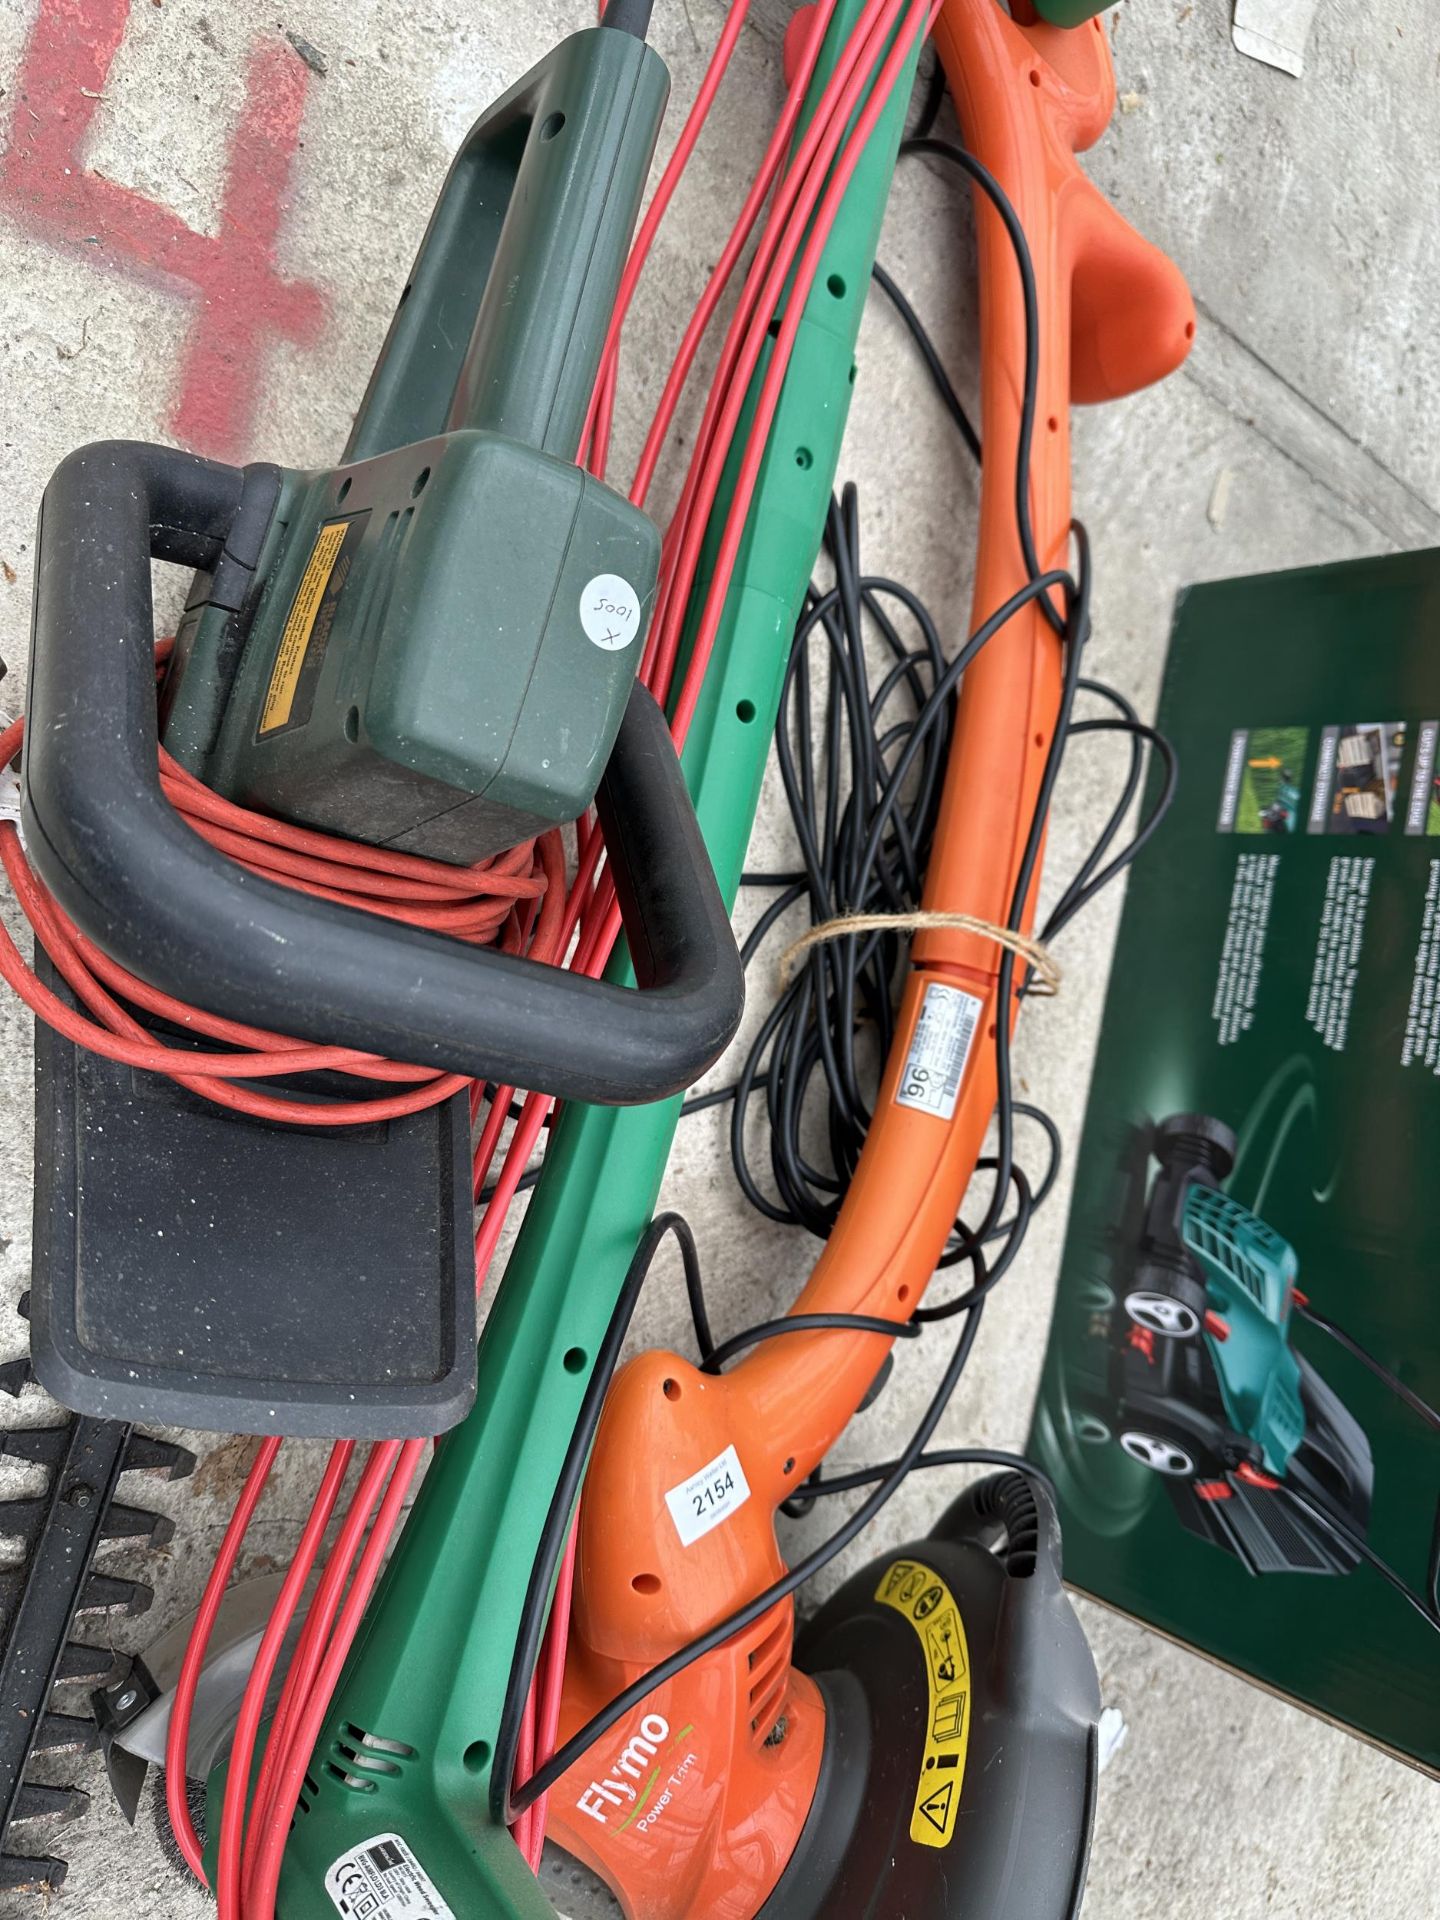 AN ELECTRIC STRIMMER, LAWN EDGER AND HEDGE TRIMMER - Image 2 of 2